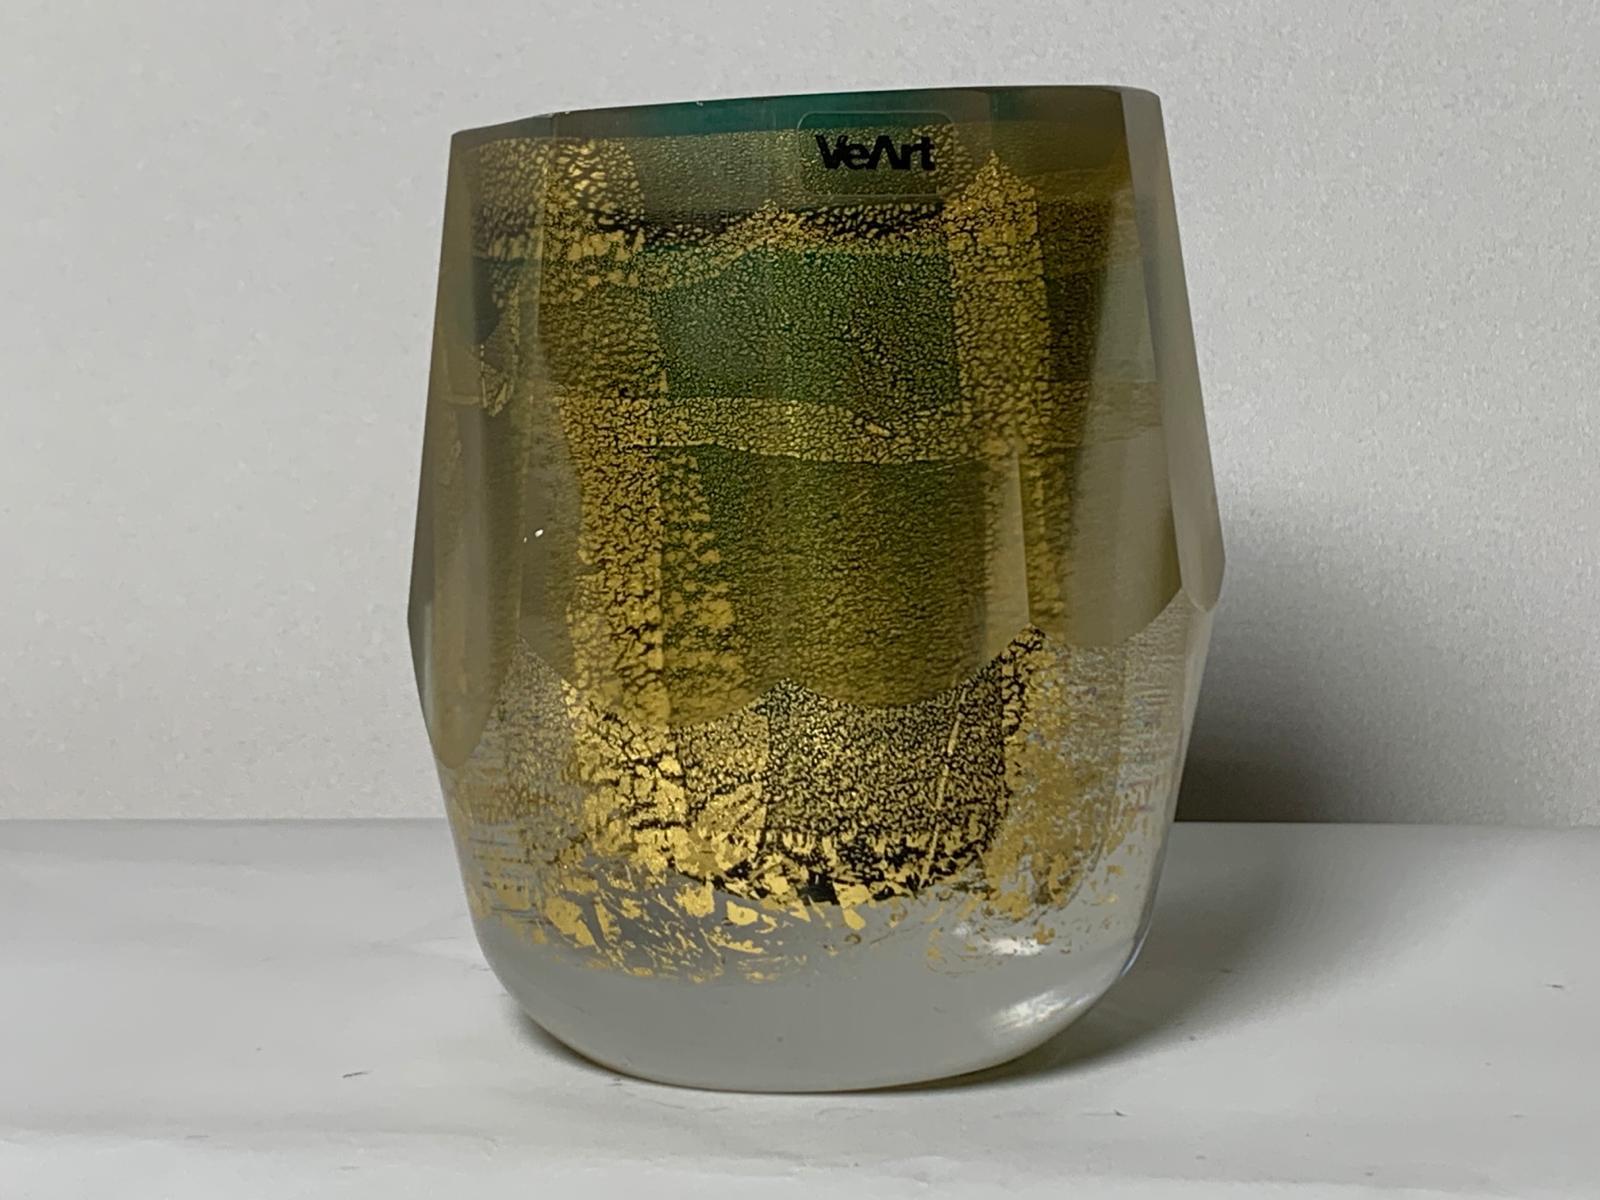 Late 20th Century Italian Murano Glass Vase I Molati Series by Afra and Tobia Scarpa for VeArt For Sale